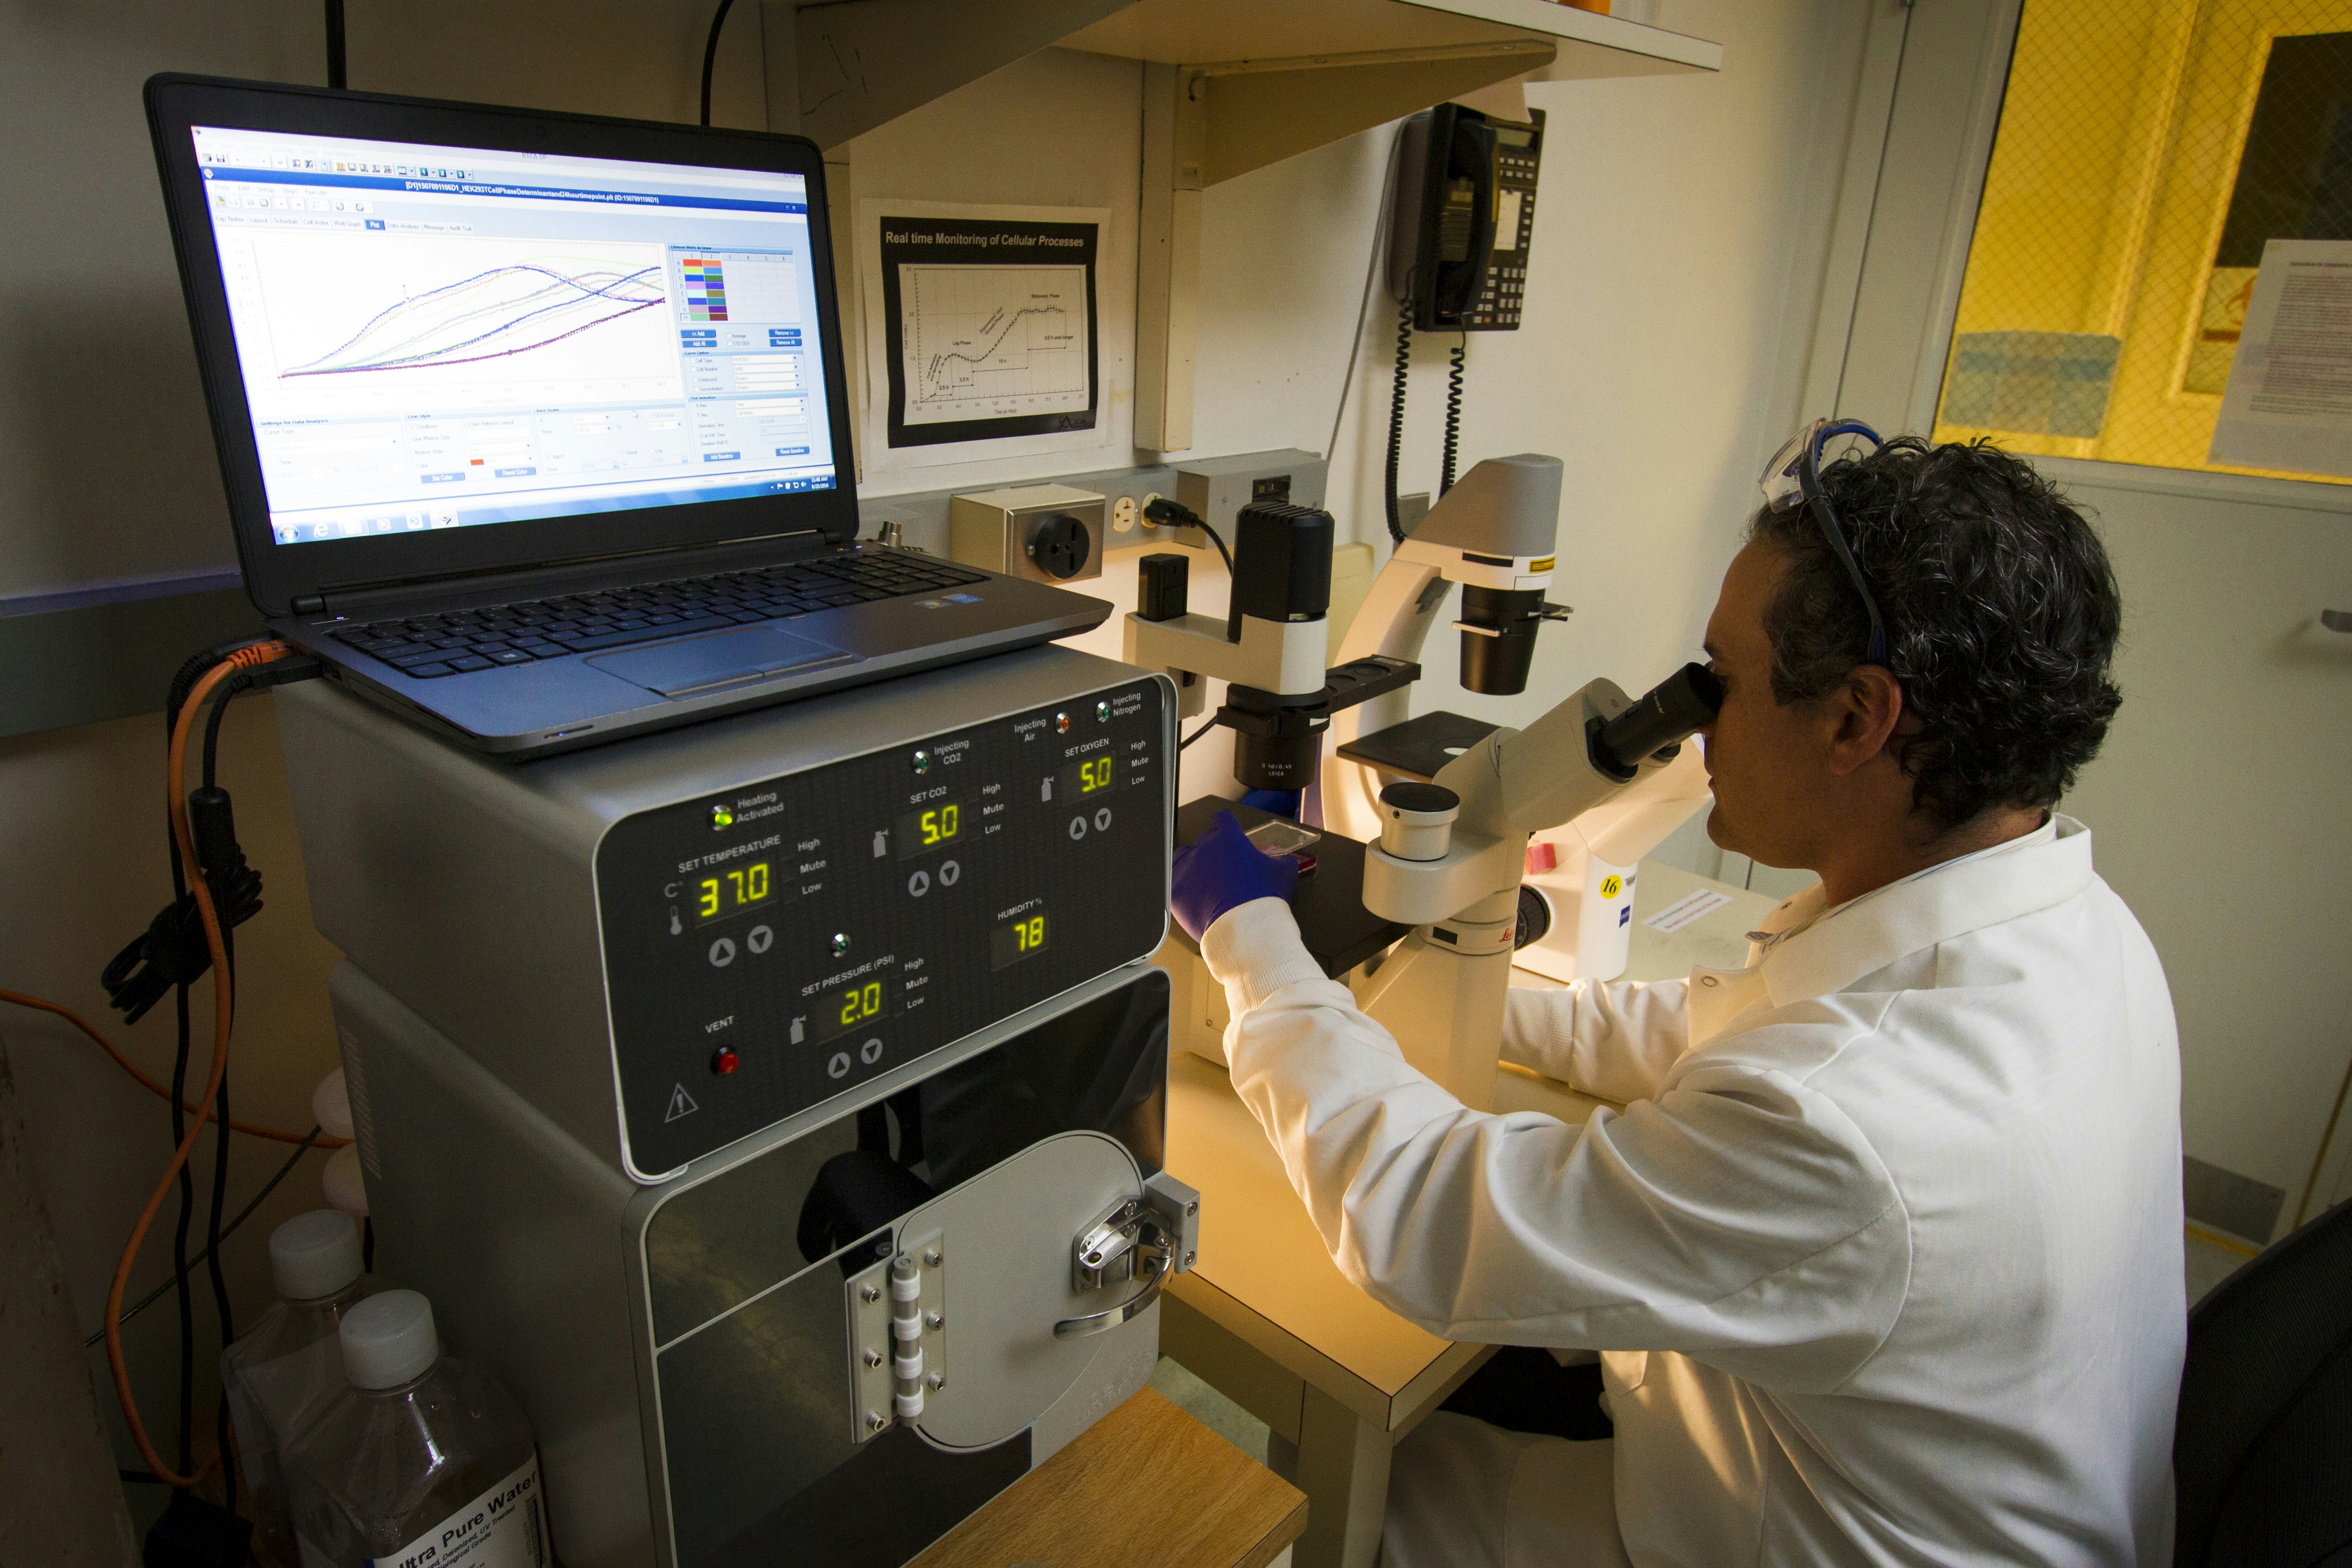 DNA Genotyping and Sequencing. A technician observing cells under a microscope at the Cancer Genomics Research Laboratory, part of the National Cancer Institute's Division of Cancer Epidemiology and Genetics (DCEG).